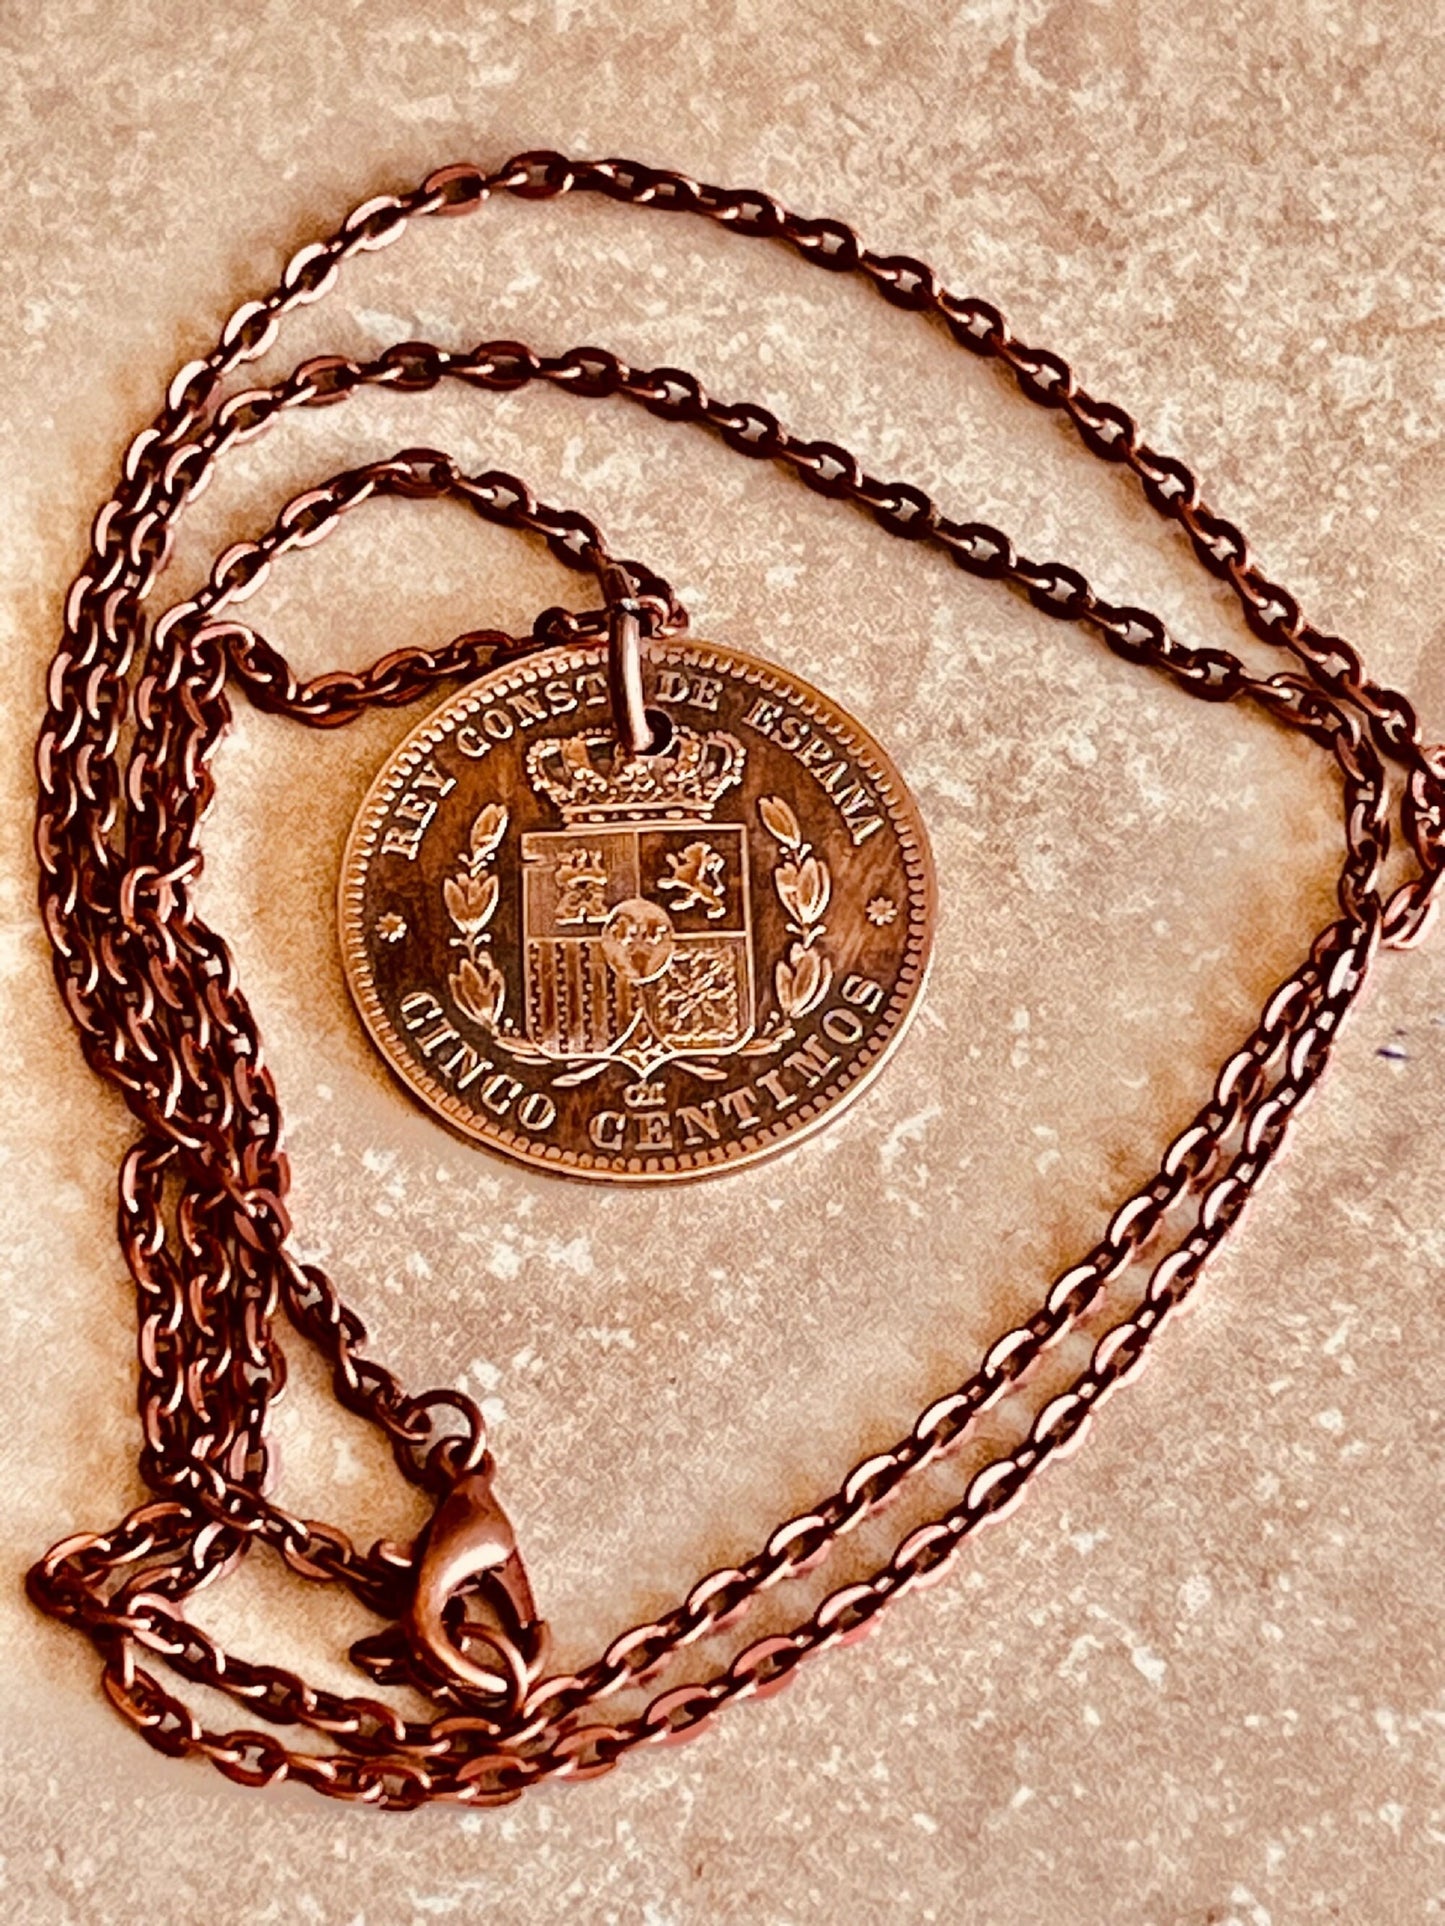 Spanish Spain 5 Centimos Cinco Coin Pendant Personal Necklace Vintage Handmade Jewelry Gift Friend Charm For Him Her World Coin Collector